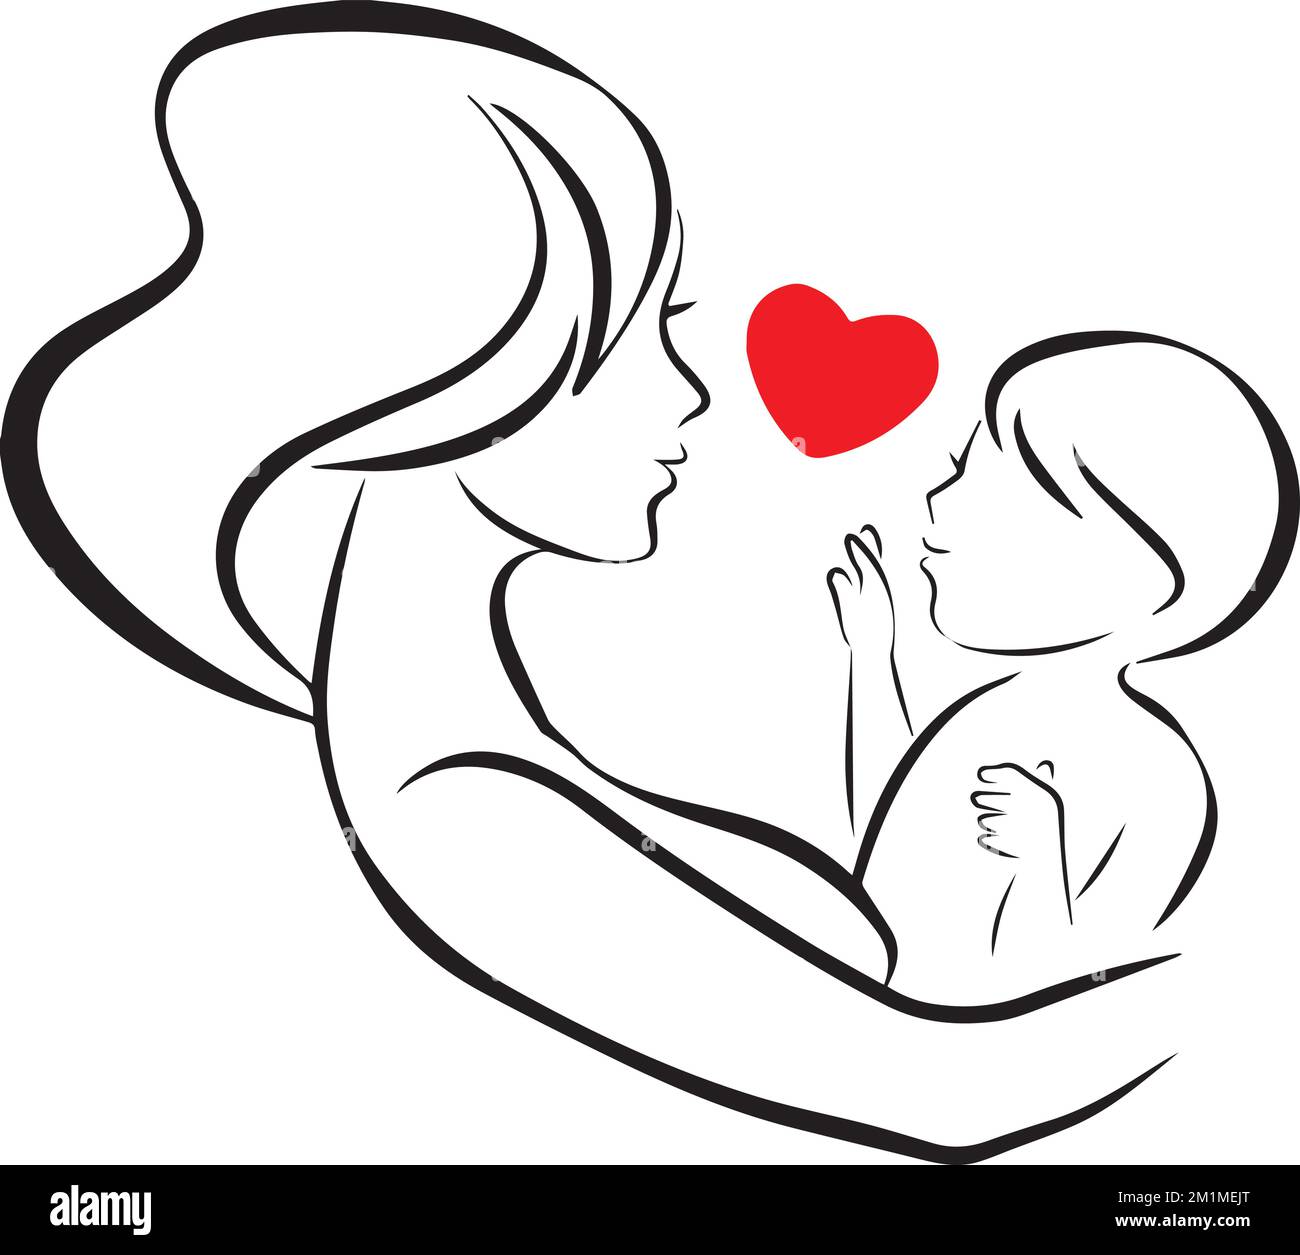 Mothers finger baby hand Stock Vector Images - Alamy